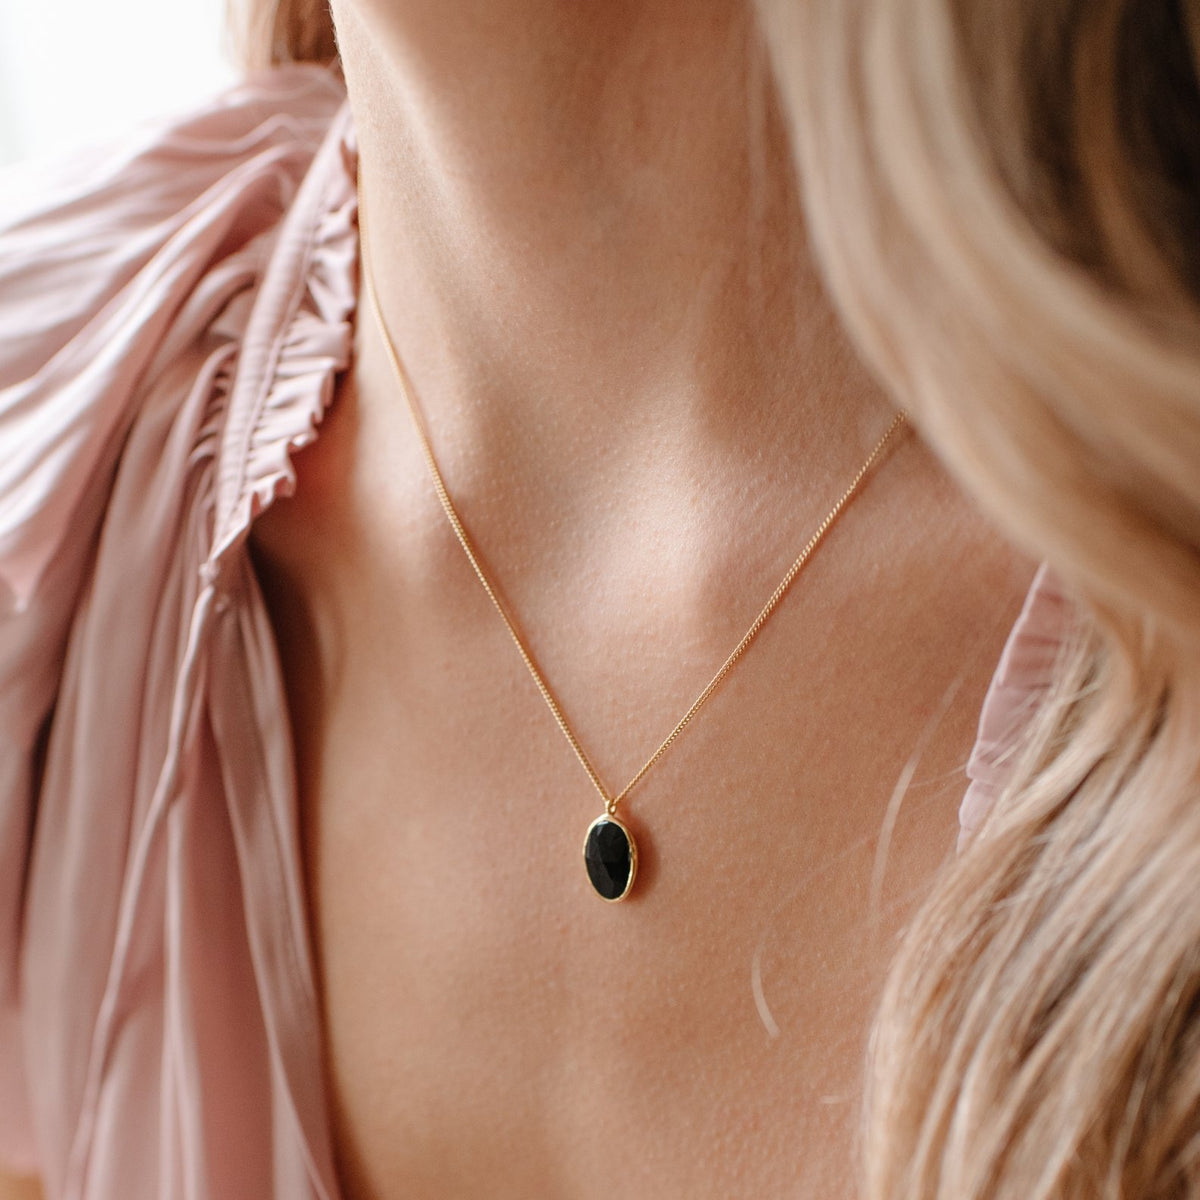 PROTECT PENDANT NECKLACE - BLACK ONYX &amp; GOLD - SO PRETTY CARA COTTER